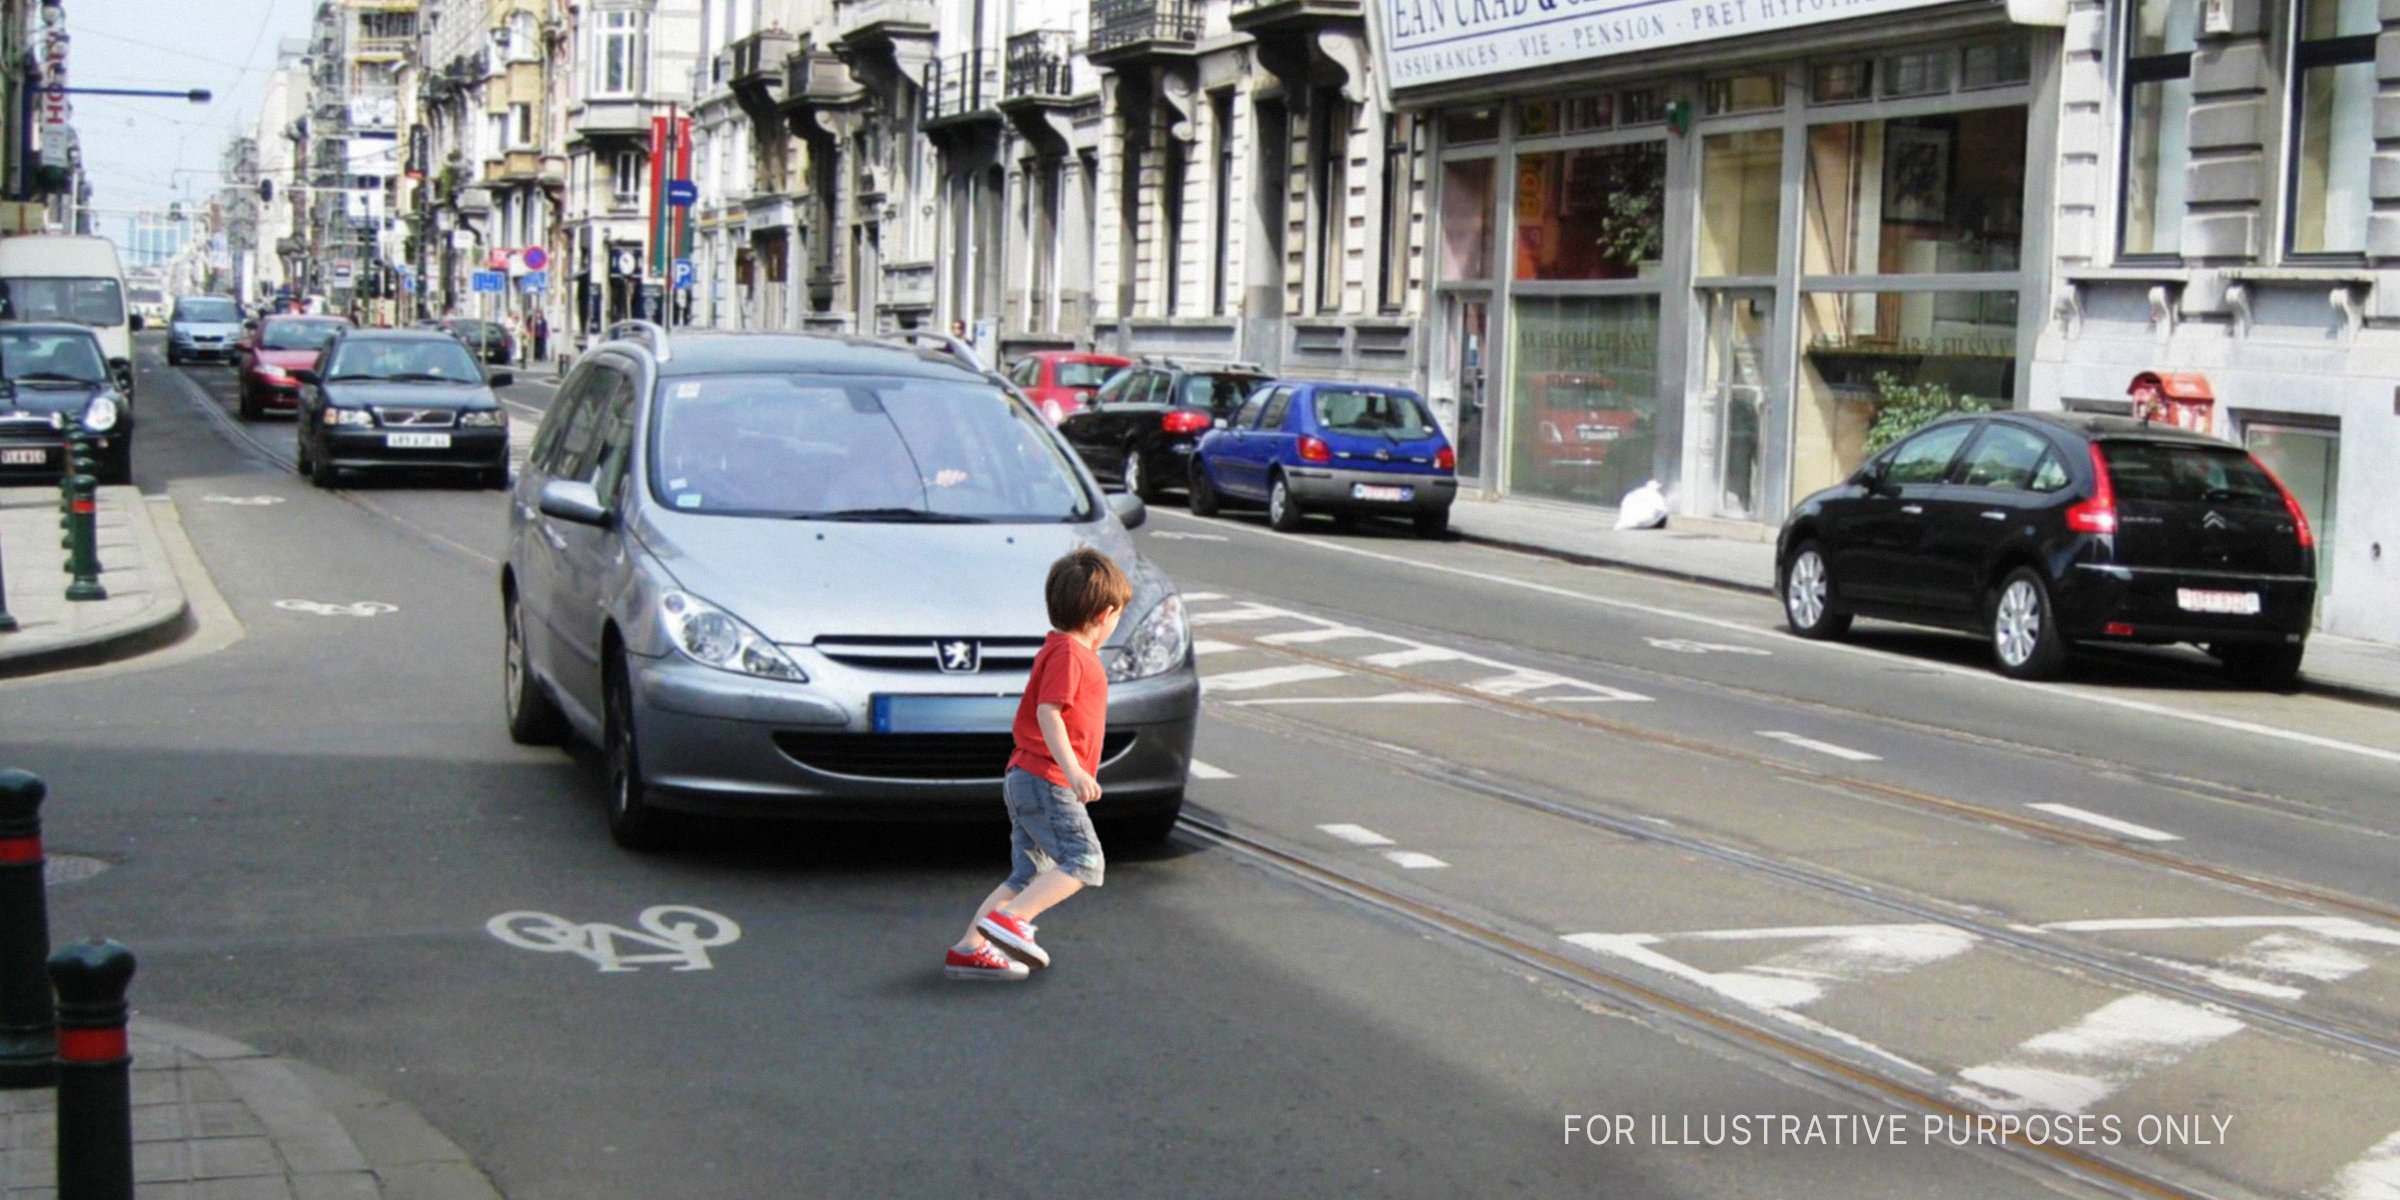 Young boy in front of car on the road | Source: Shutterstock, Flickr / andynash (CC BY-SA 2.0) 